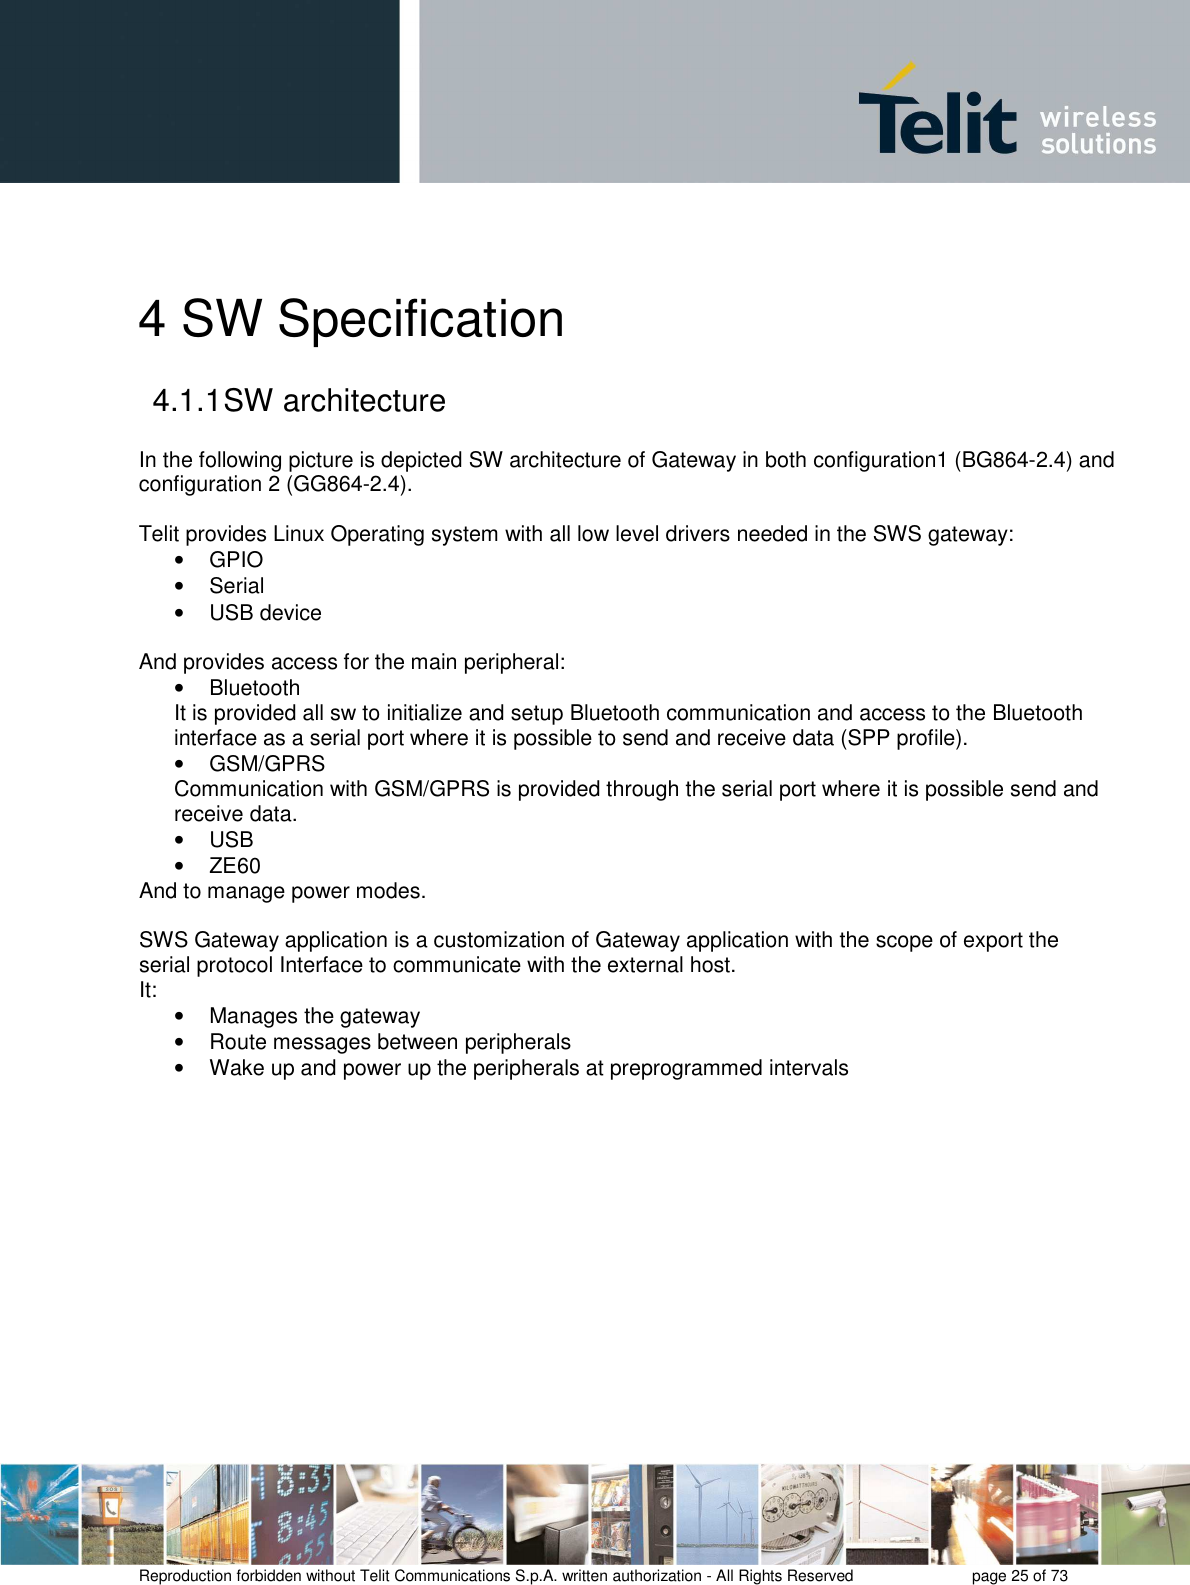       Reproduction forbidden without Telit Communications S.p.A. written authorization - All Rights Reserved    page 25 of 73  4 SW Specification 4.1.1 SW architecture  In the following picture is depicted SW architecture of Gateway in both configuration1 (BG864-2.4) and configuration 2 (GG864-2.4).  Telit provides Linux Operating system with all low level drivers needed in the SWS gateway: •  GPIO •  Serial •  USB device  And provides access for the main peripheral: •  Bluetooth  It is provided all sw to initialize and setup Bluetooth communication and access to the Bluetooth interface as a serial port where it is possible to send and receive data (SPP profile). •  GSM/GPRS Communication with GSM/GPRS is provided through the serial port where it is possible send and receive data. •  USB •  ZE60 And to manage power modes.  SWS Gateway application is a customization of Gateway application with the scope of export the serial protocol Interface to communicate with the external host. It: •  Manages the gateway •  Route messages between peripherals •  Wake up and power up the peripherals at preprogrammed intervals  